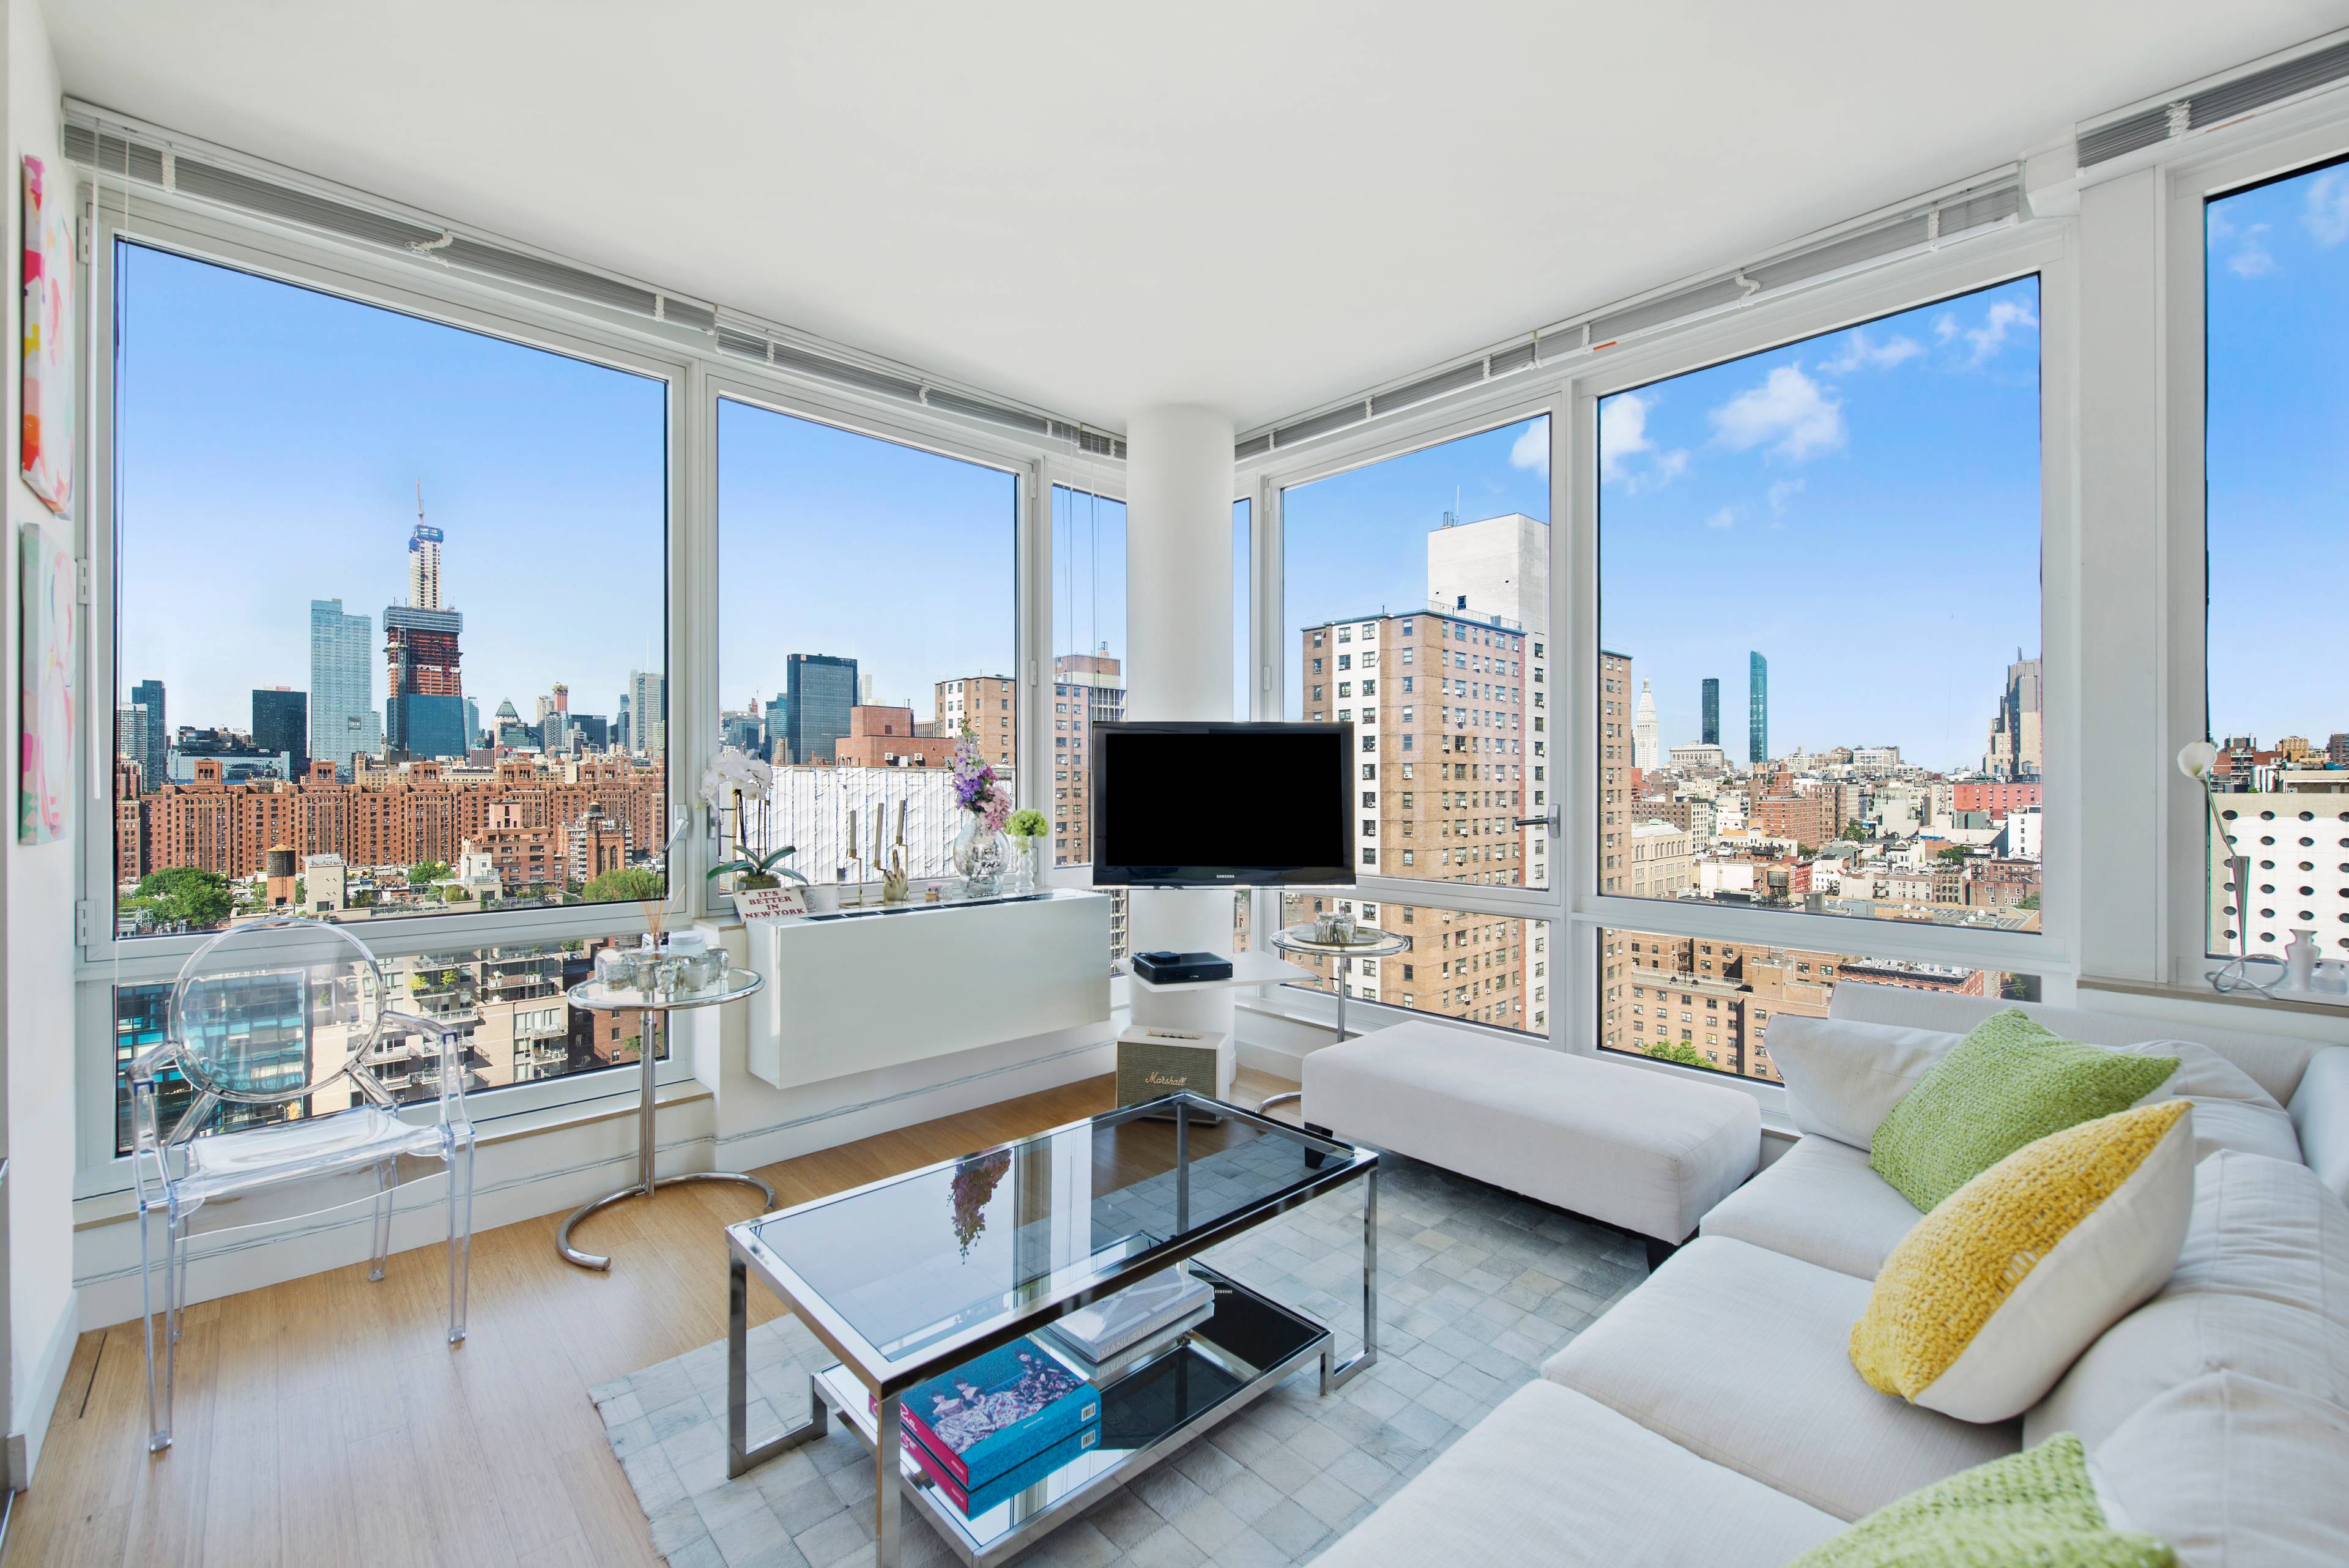 This rarely available, high floor, corner unit is situated in West Chelsea's most prestigious building, The Caledonia.